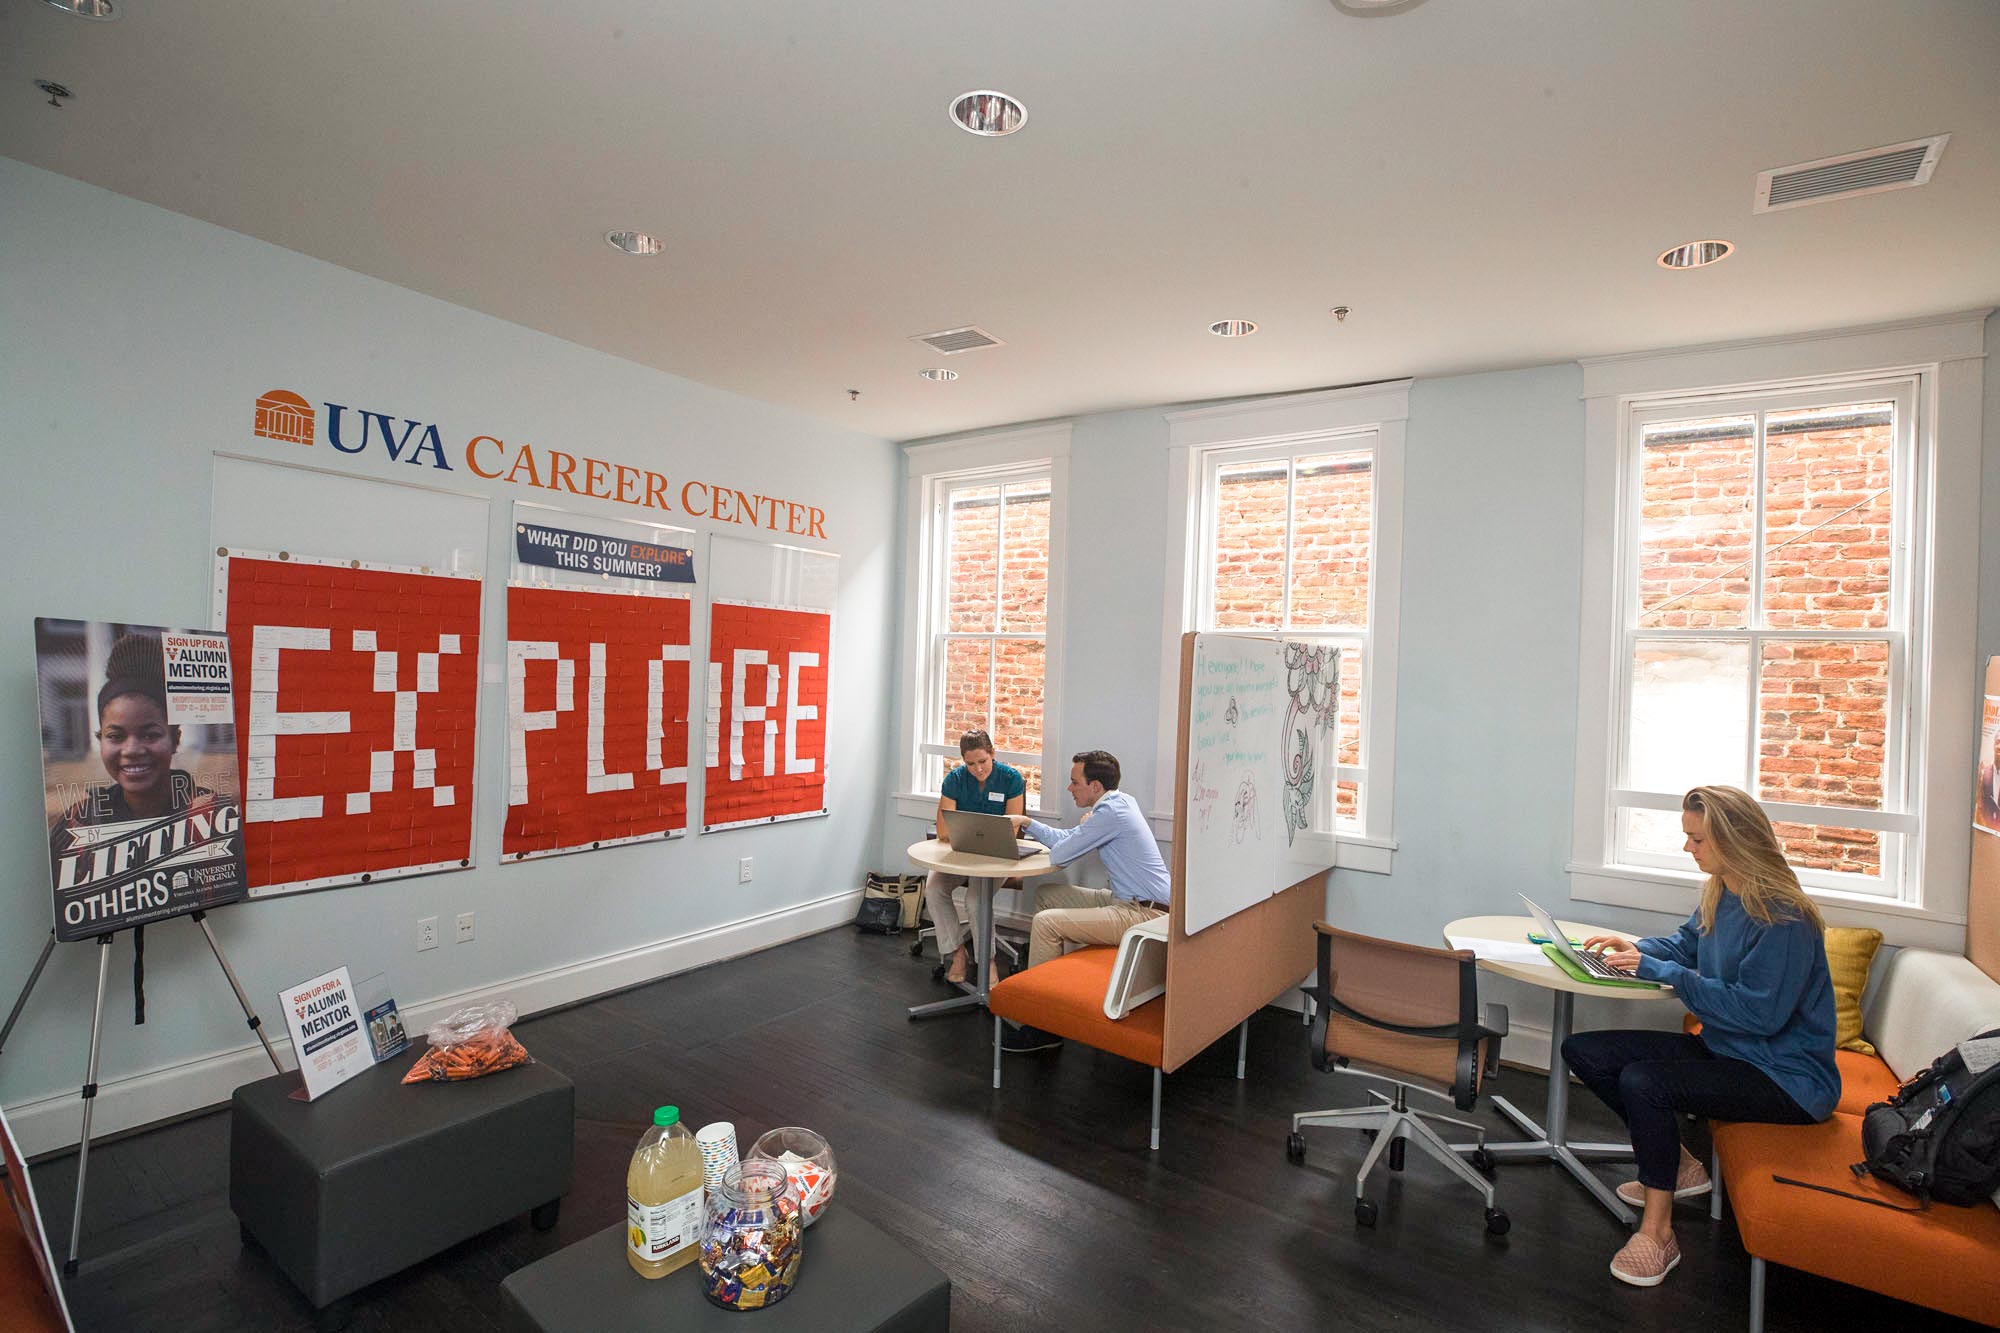 Career counselors are available to help students with résumés and interview prep, connect them with internships and job opportunities or just to talk about the future. (Photo by Dan Addison, University Communications)